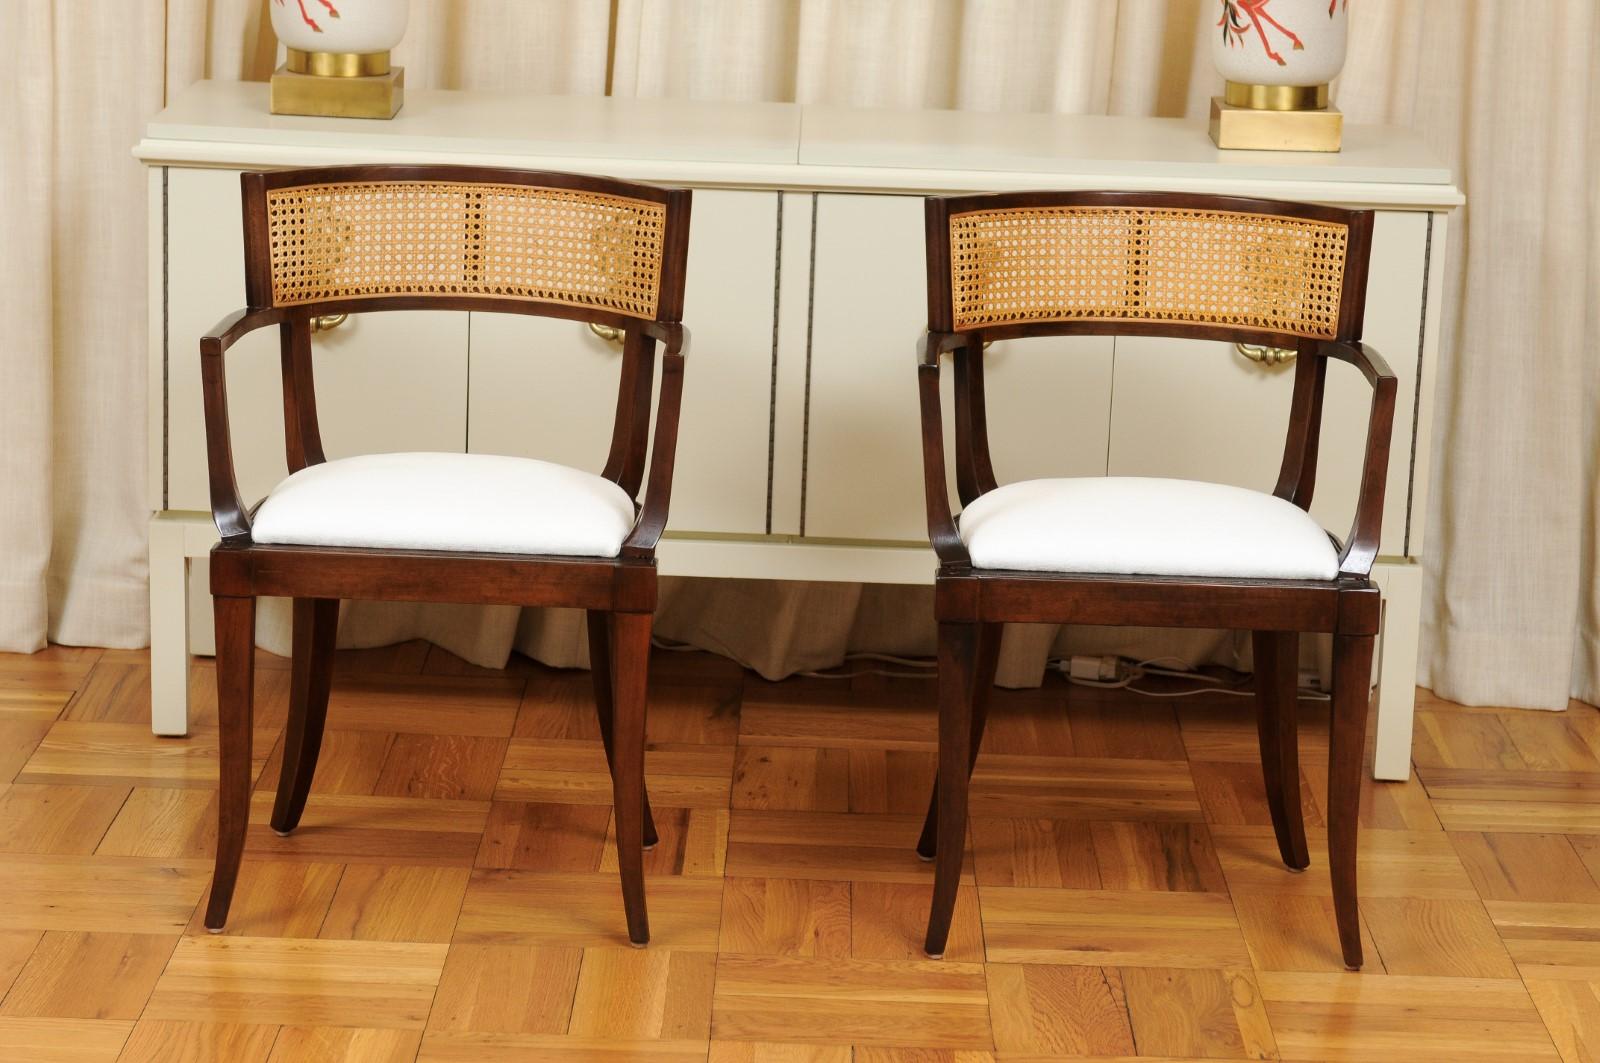 All Arms, Exquisite Set of 14 Klismos Cane Dining Chairs by Baker, circa 1958 For Sale 3